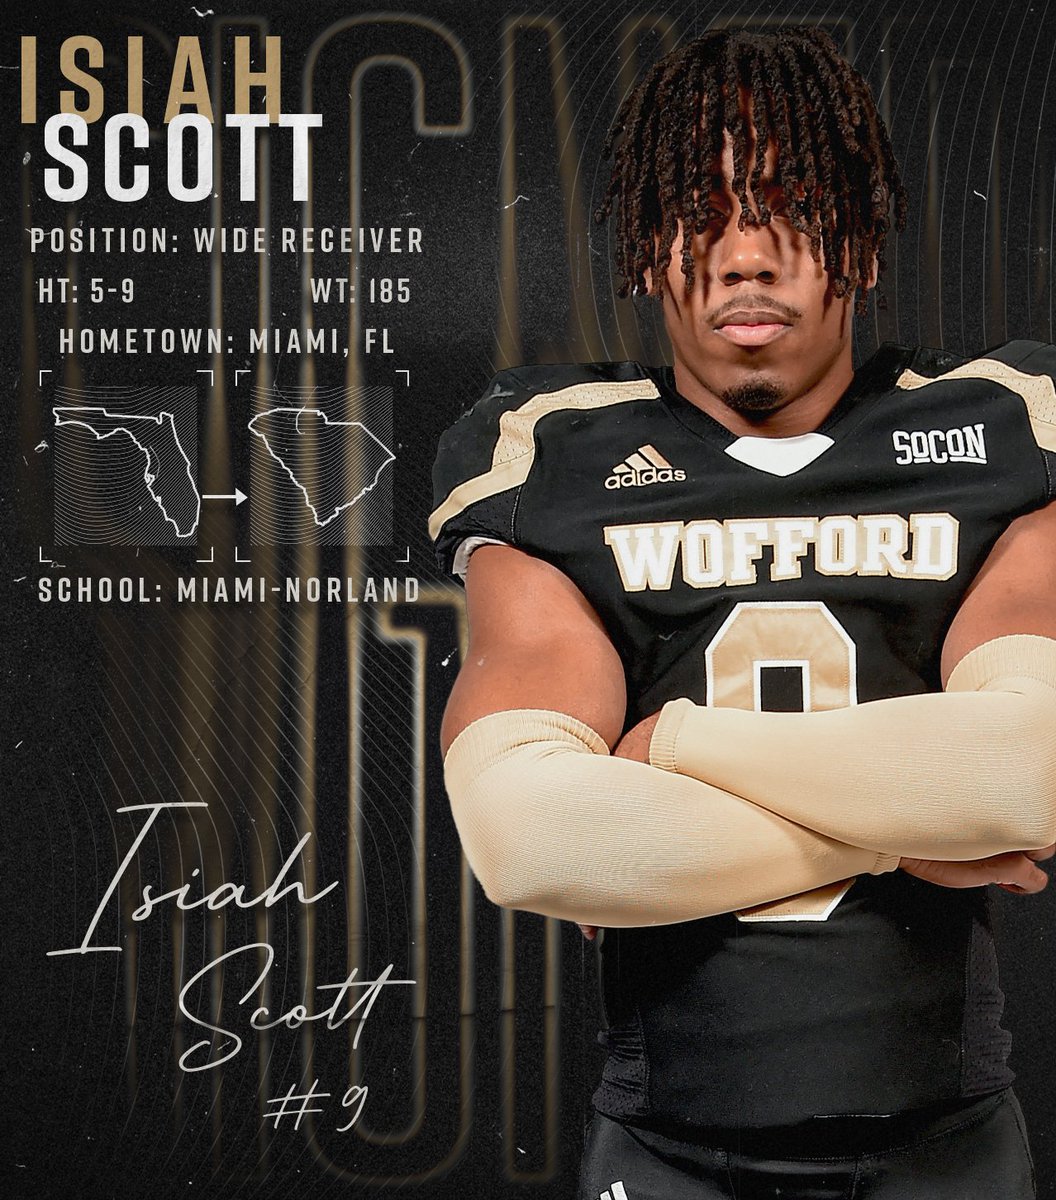 Welcome to the Wofford football family a wide receiver from Miami, Florida - Isaiah Scott!